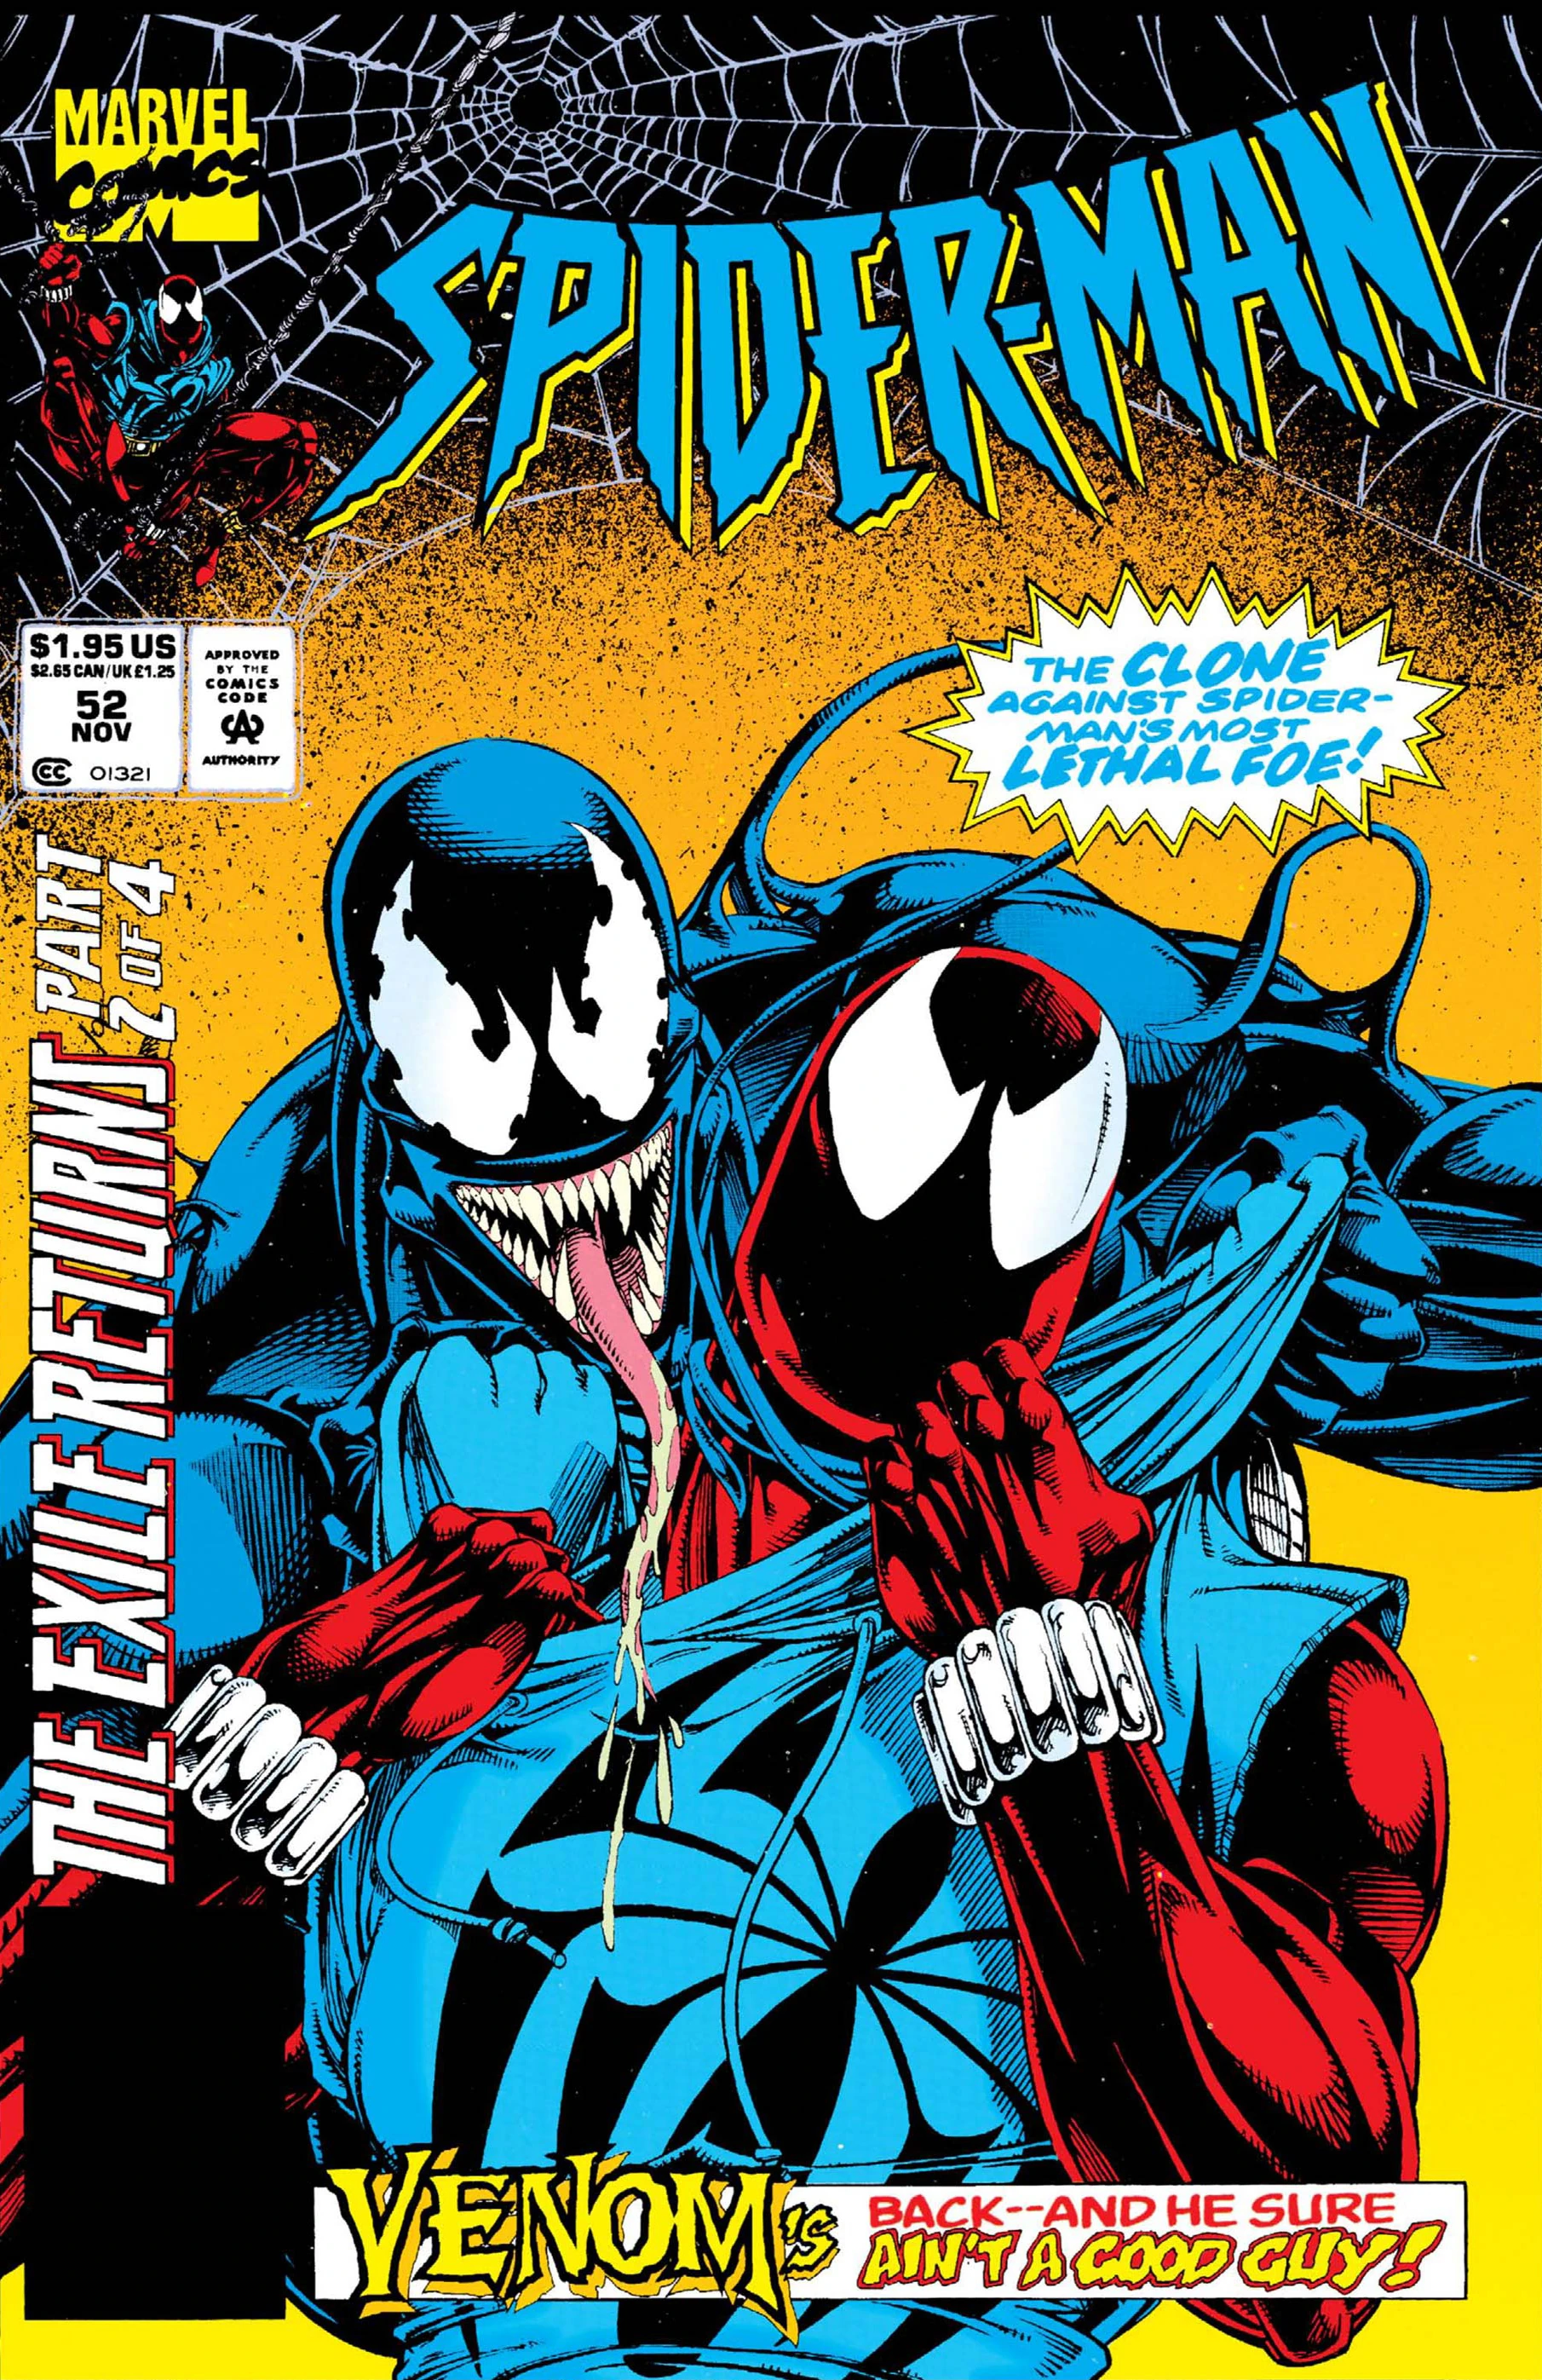 Ben Reilly debuts as the Scarlet Spider only to run into Venom on Tom Lyle's cover to Spider-Man Vol. 1 #52 "Deadline" (1998), Marvel Comics